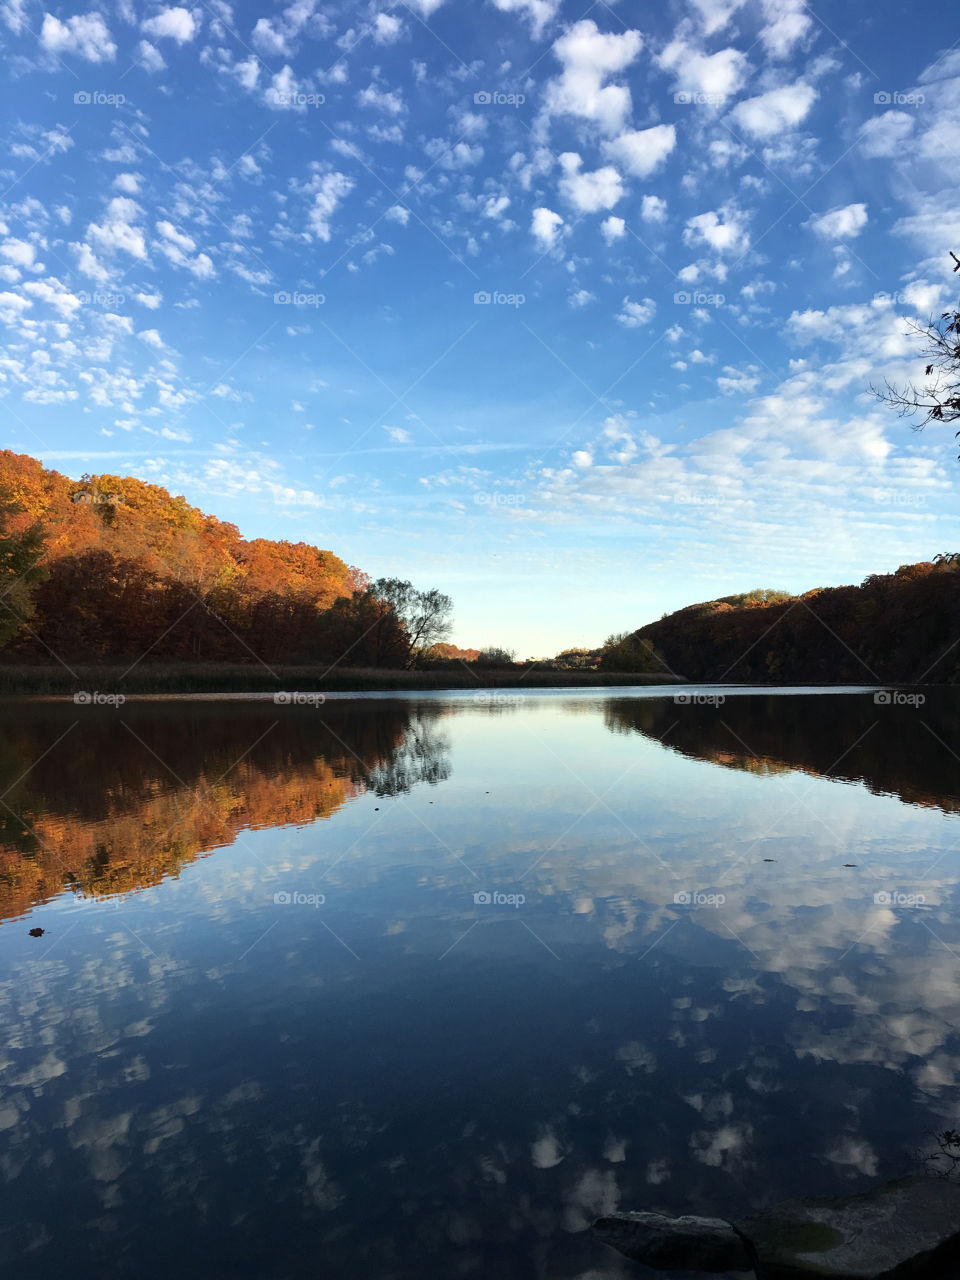 Scenic shot of beautiful fall foliage along the Genesee River just outside of Rochester, NY.